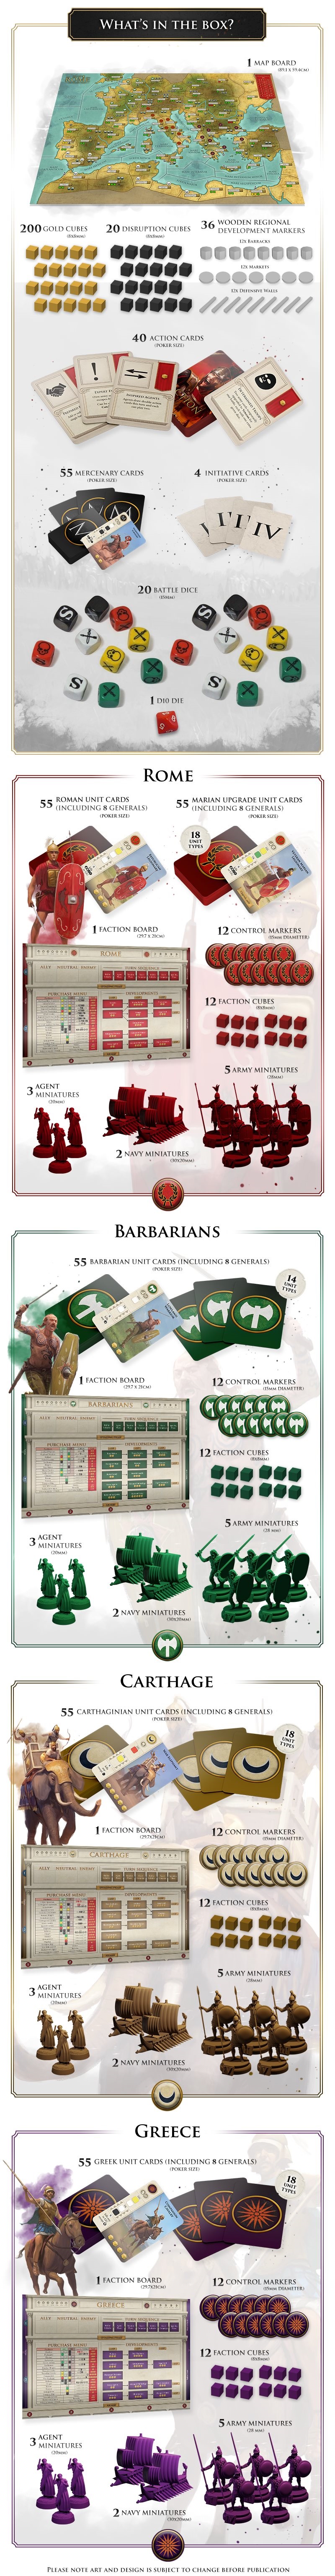 Total War Rome - The Board Game Contents - PSC Games